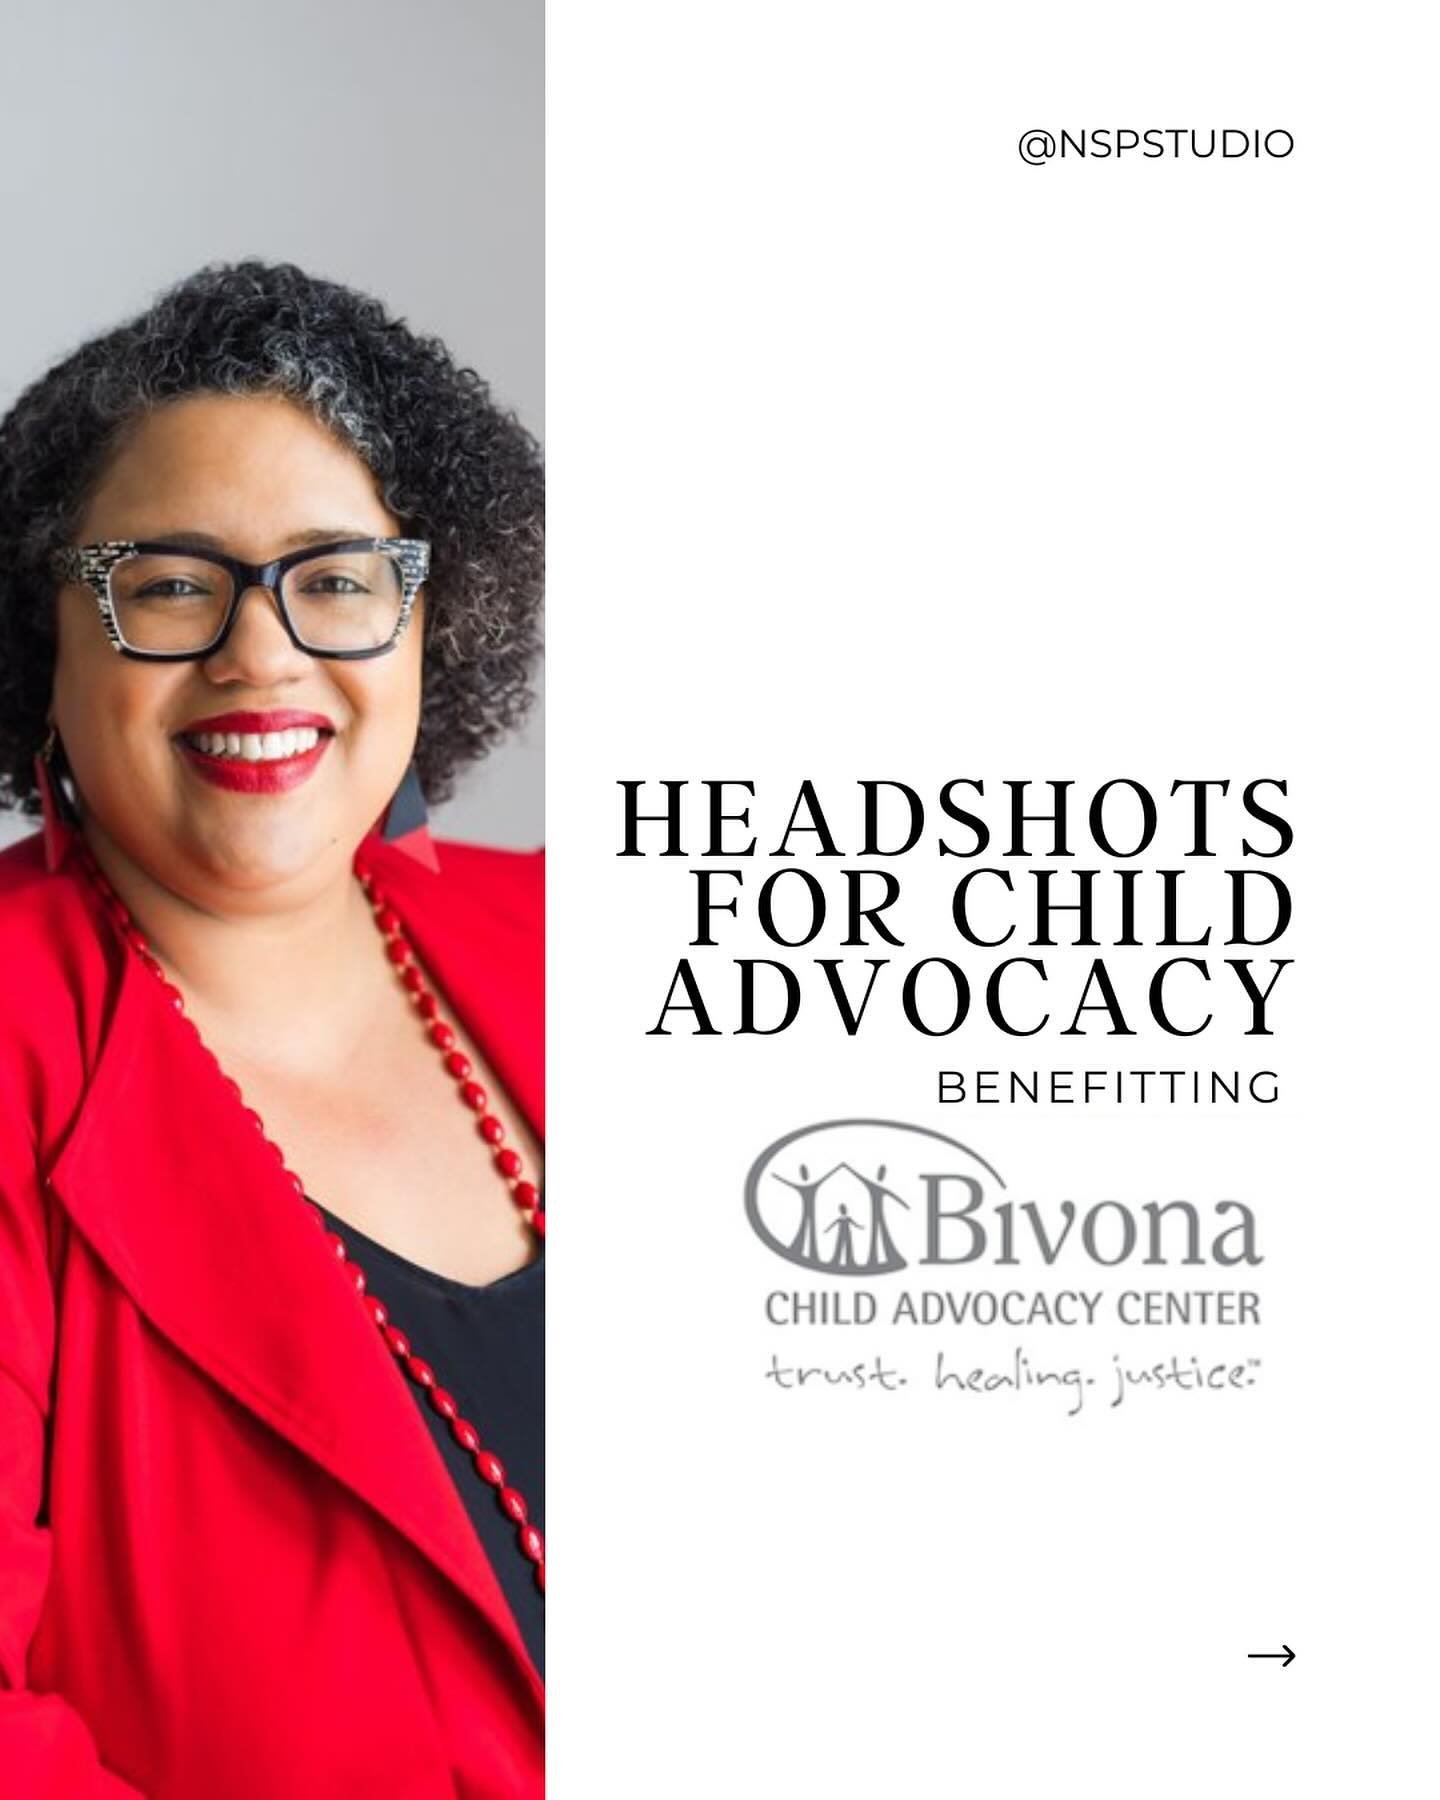 HEADSHOTS FOR CHILD ADVOCACY 🤍

Our beloved biannual portrait fundraising event is BACK and spots are already going quickly!! During the week of June 10th-18th, we are offering discounted professional headshots at our studio and $25 from each sessio